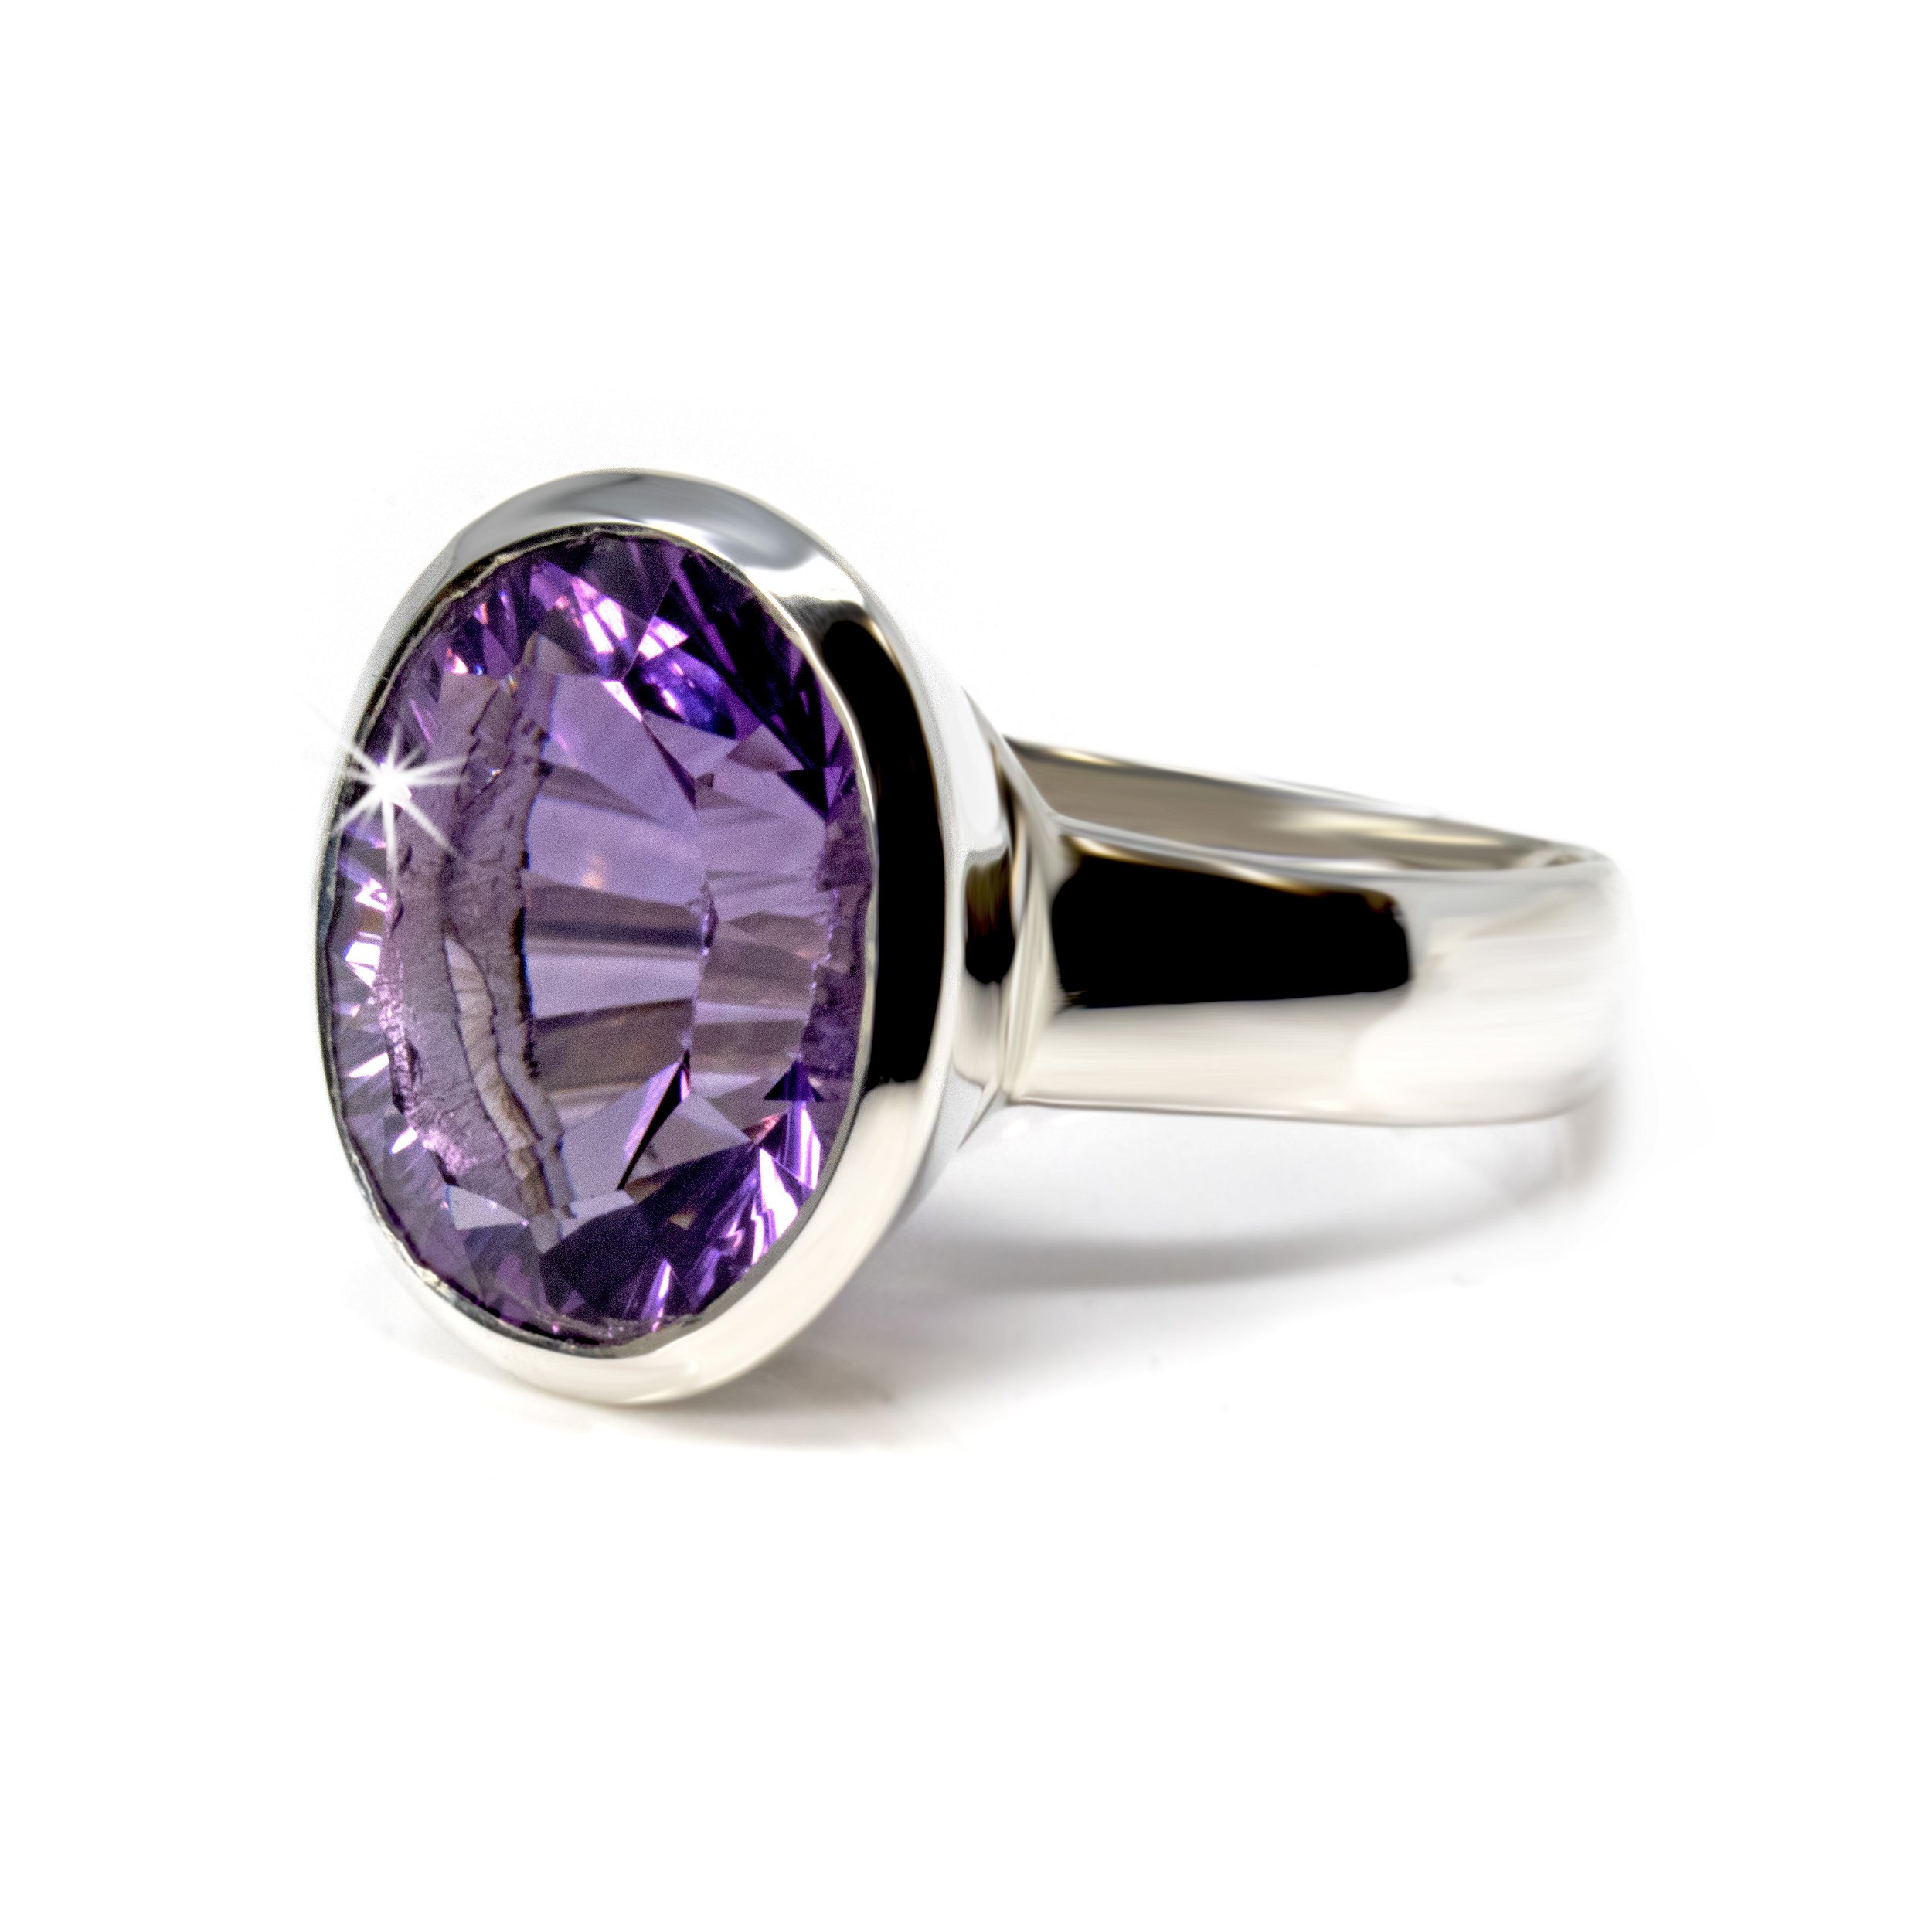 Faceted Amethyst Ring - Oval With Tall Tapered Silver Bezel & Laser Cut Facet Size 10